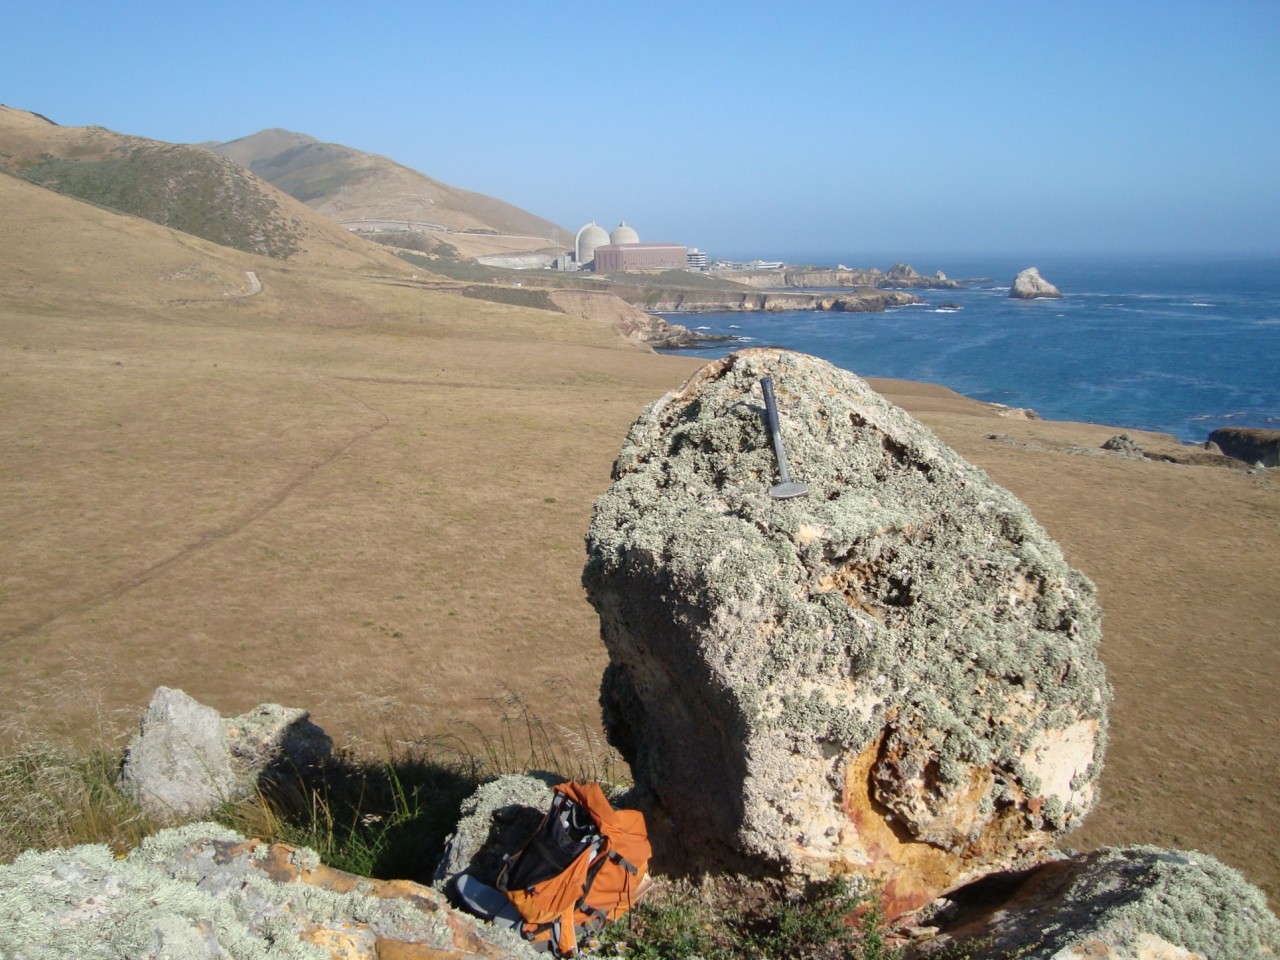 An Imperial College London team has found that PBRs, or precariously balanced rocks, can exist in the landscape for twice as long as previously assumed